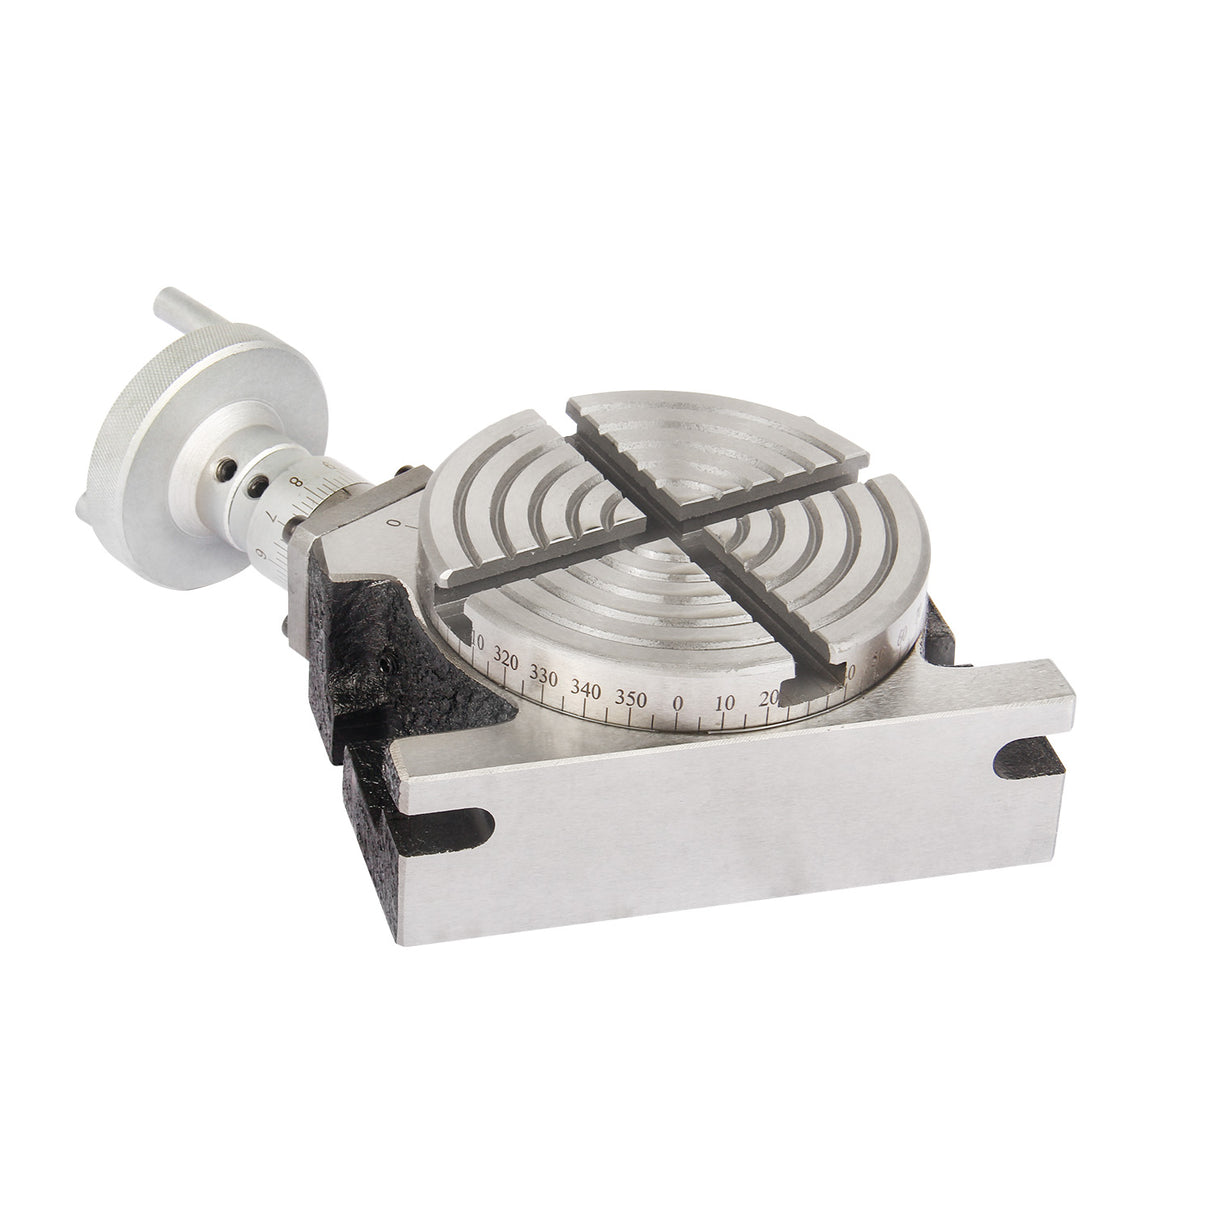 Kaka Industrial M-HV-4 Mini Series Rotary Table,4" Rotary Table with Tilting Base